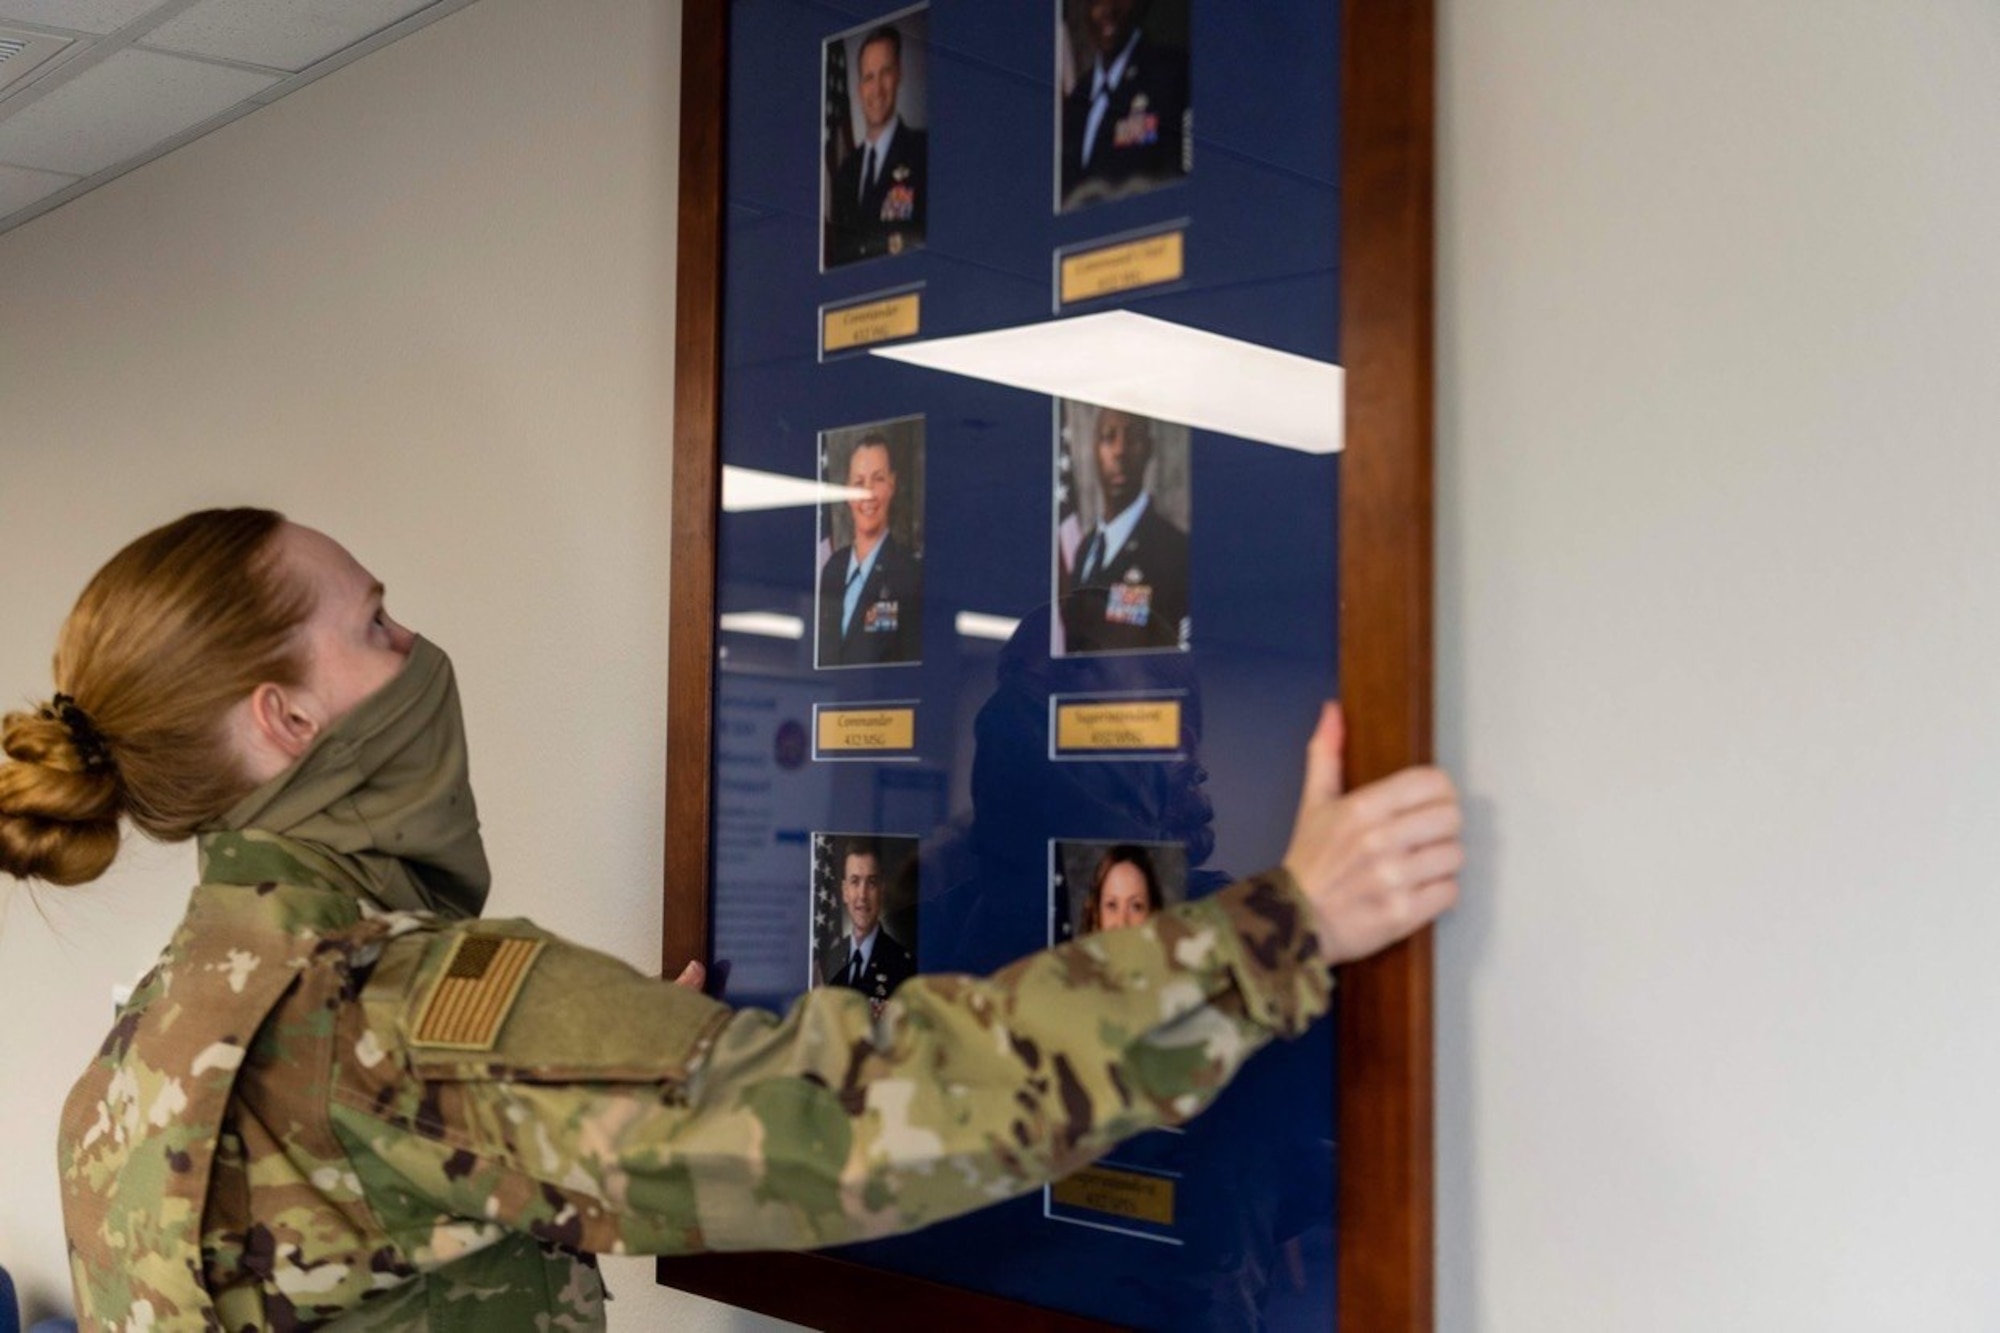 Airman 1st Class Alexandria, force management technician with the 432nd Support Squadron, carefully places a command board on the wall of the newly renovated consolidated support center at Creech Air Force Base.